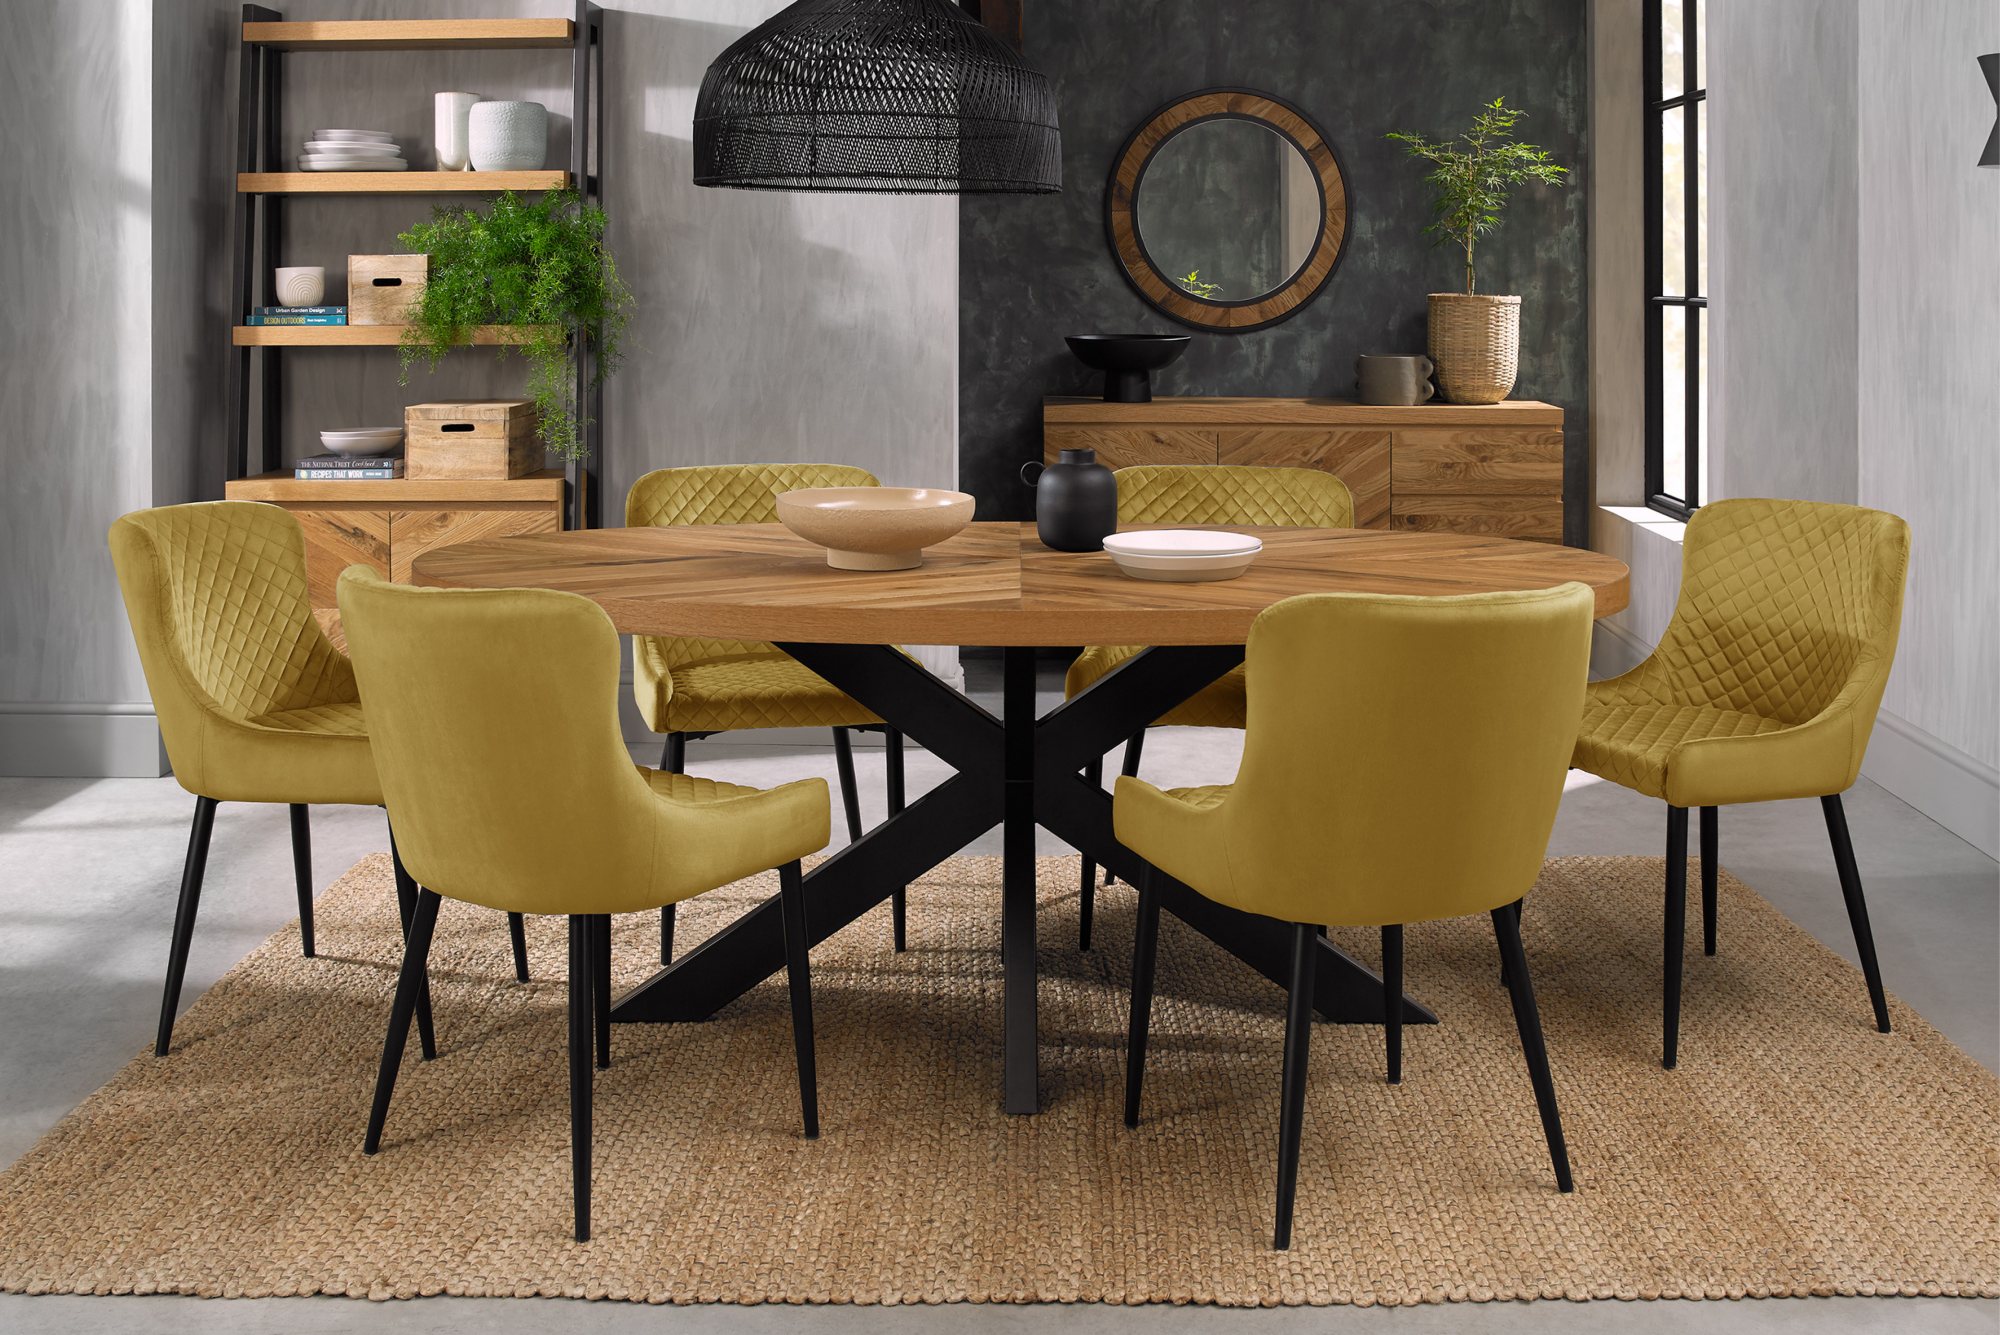 Home Origins Bosco Rustic Oak 6 seater dining table with 6 Cezanne chairs- mustard velvet fabric